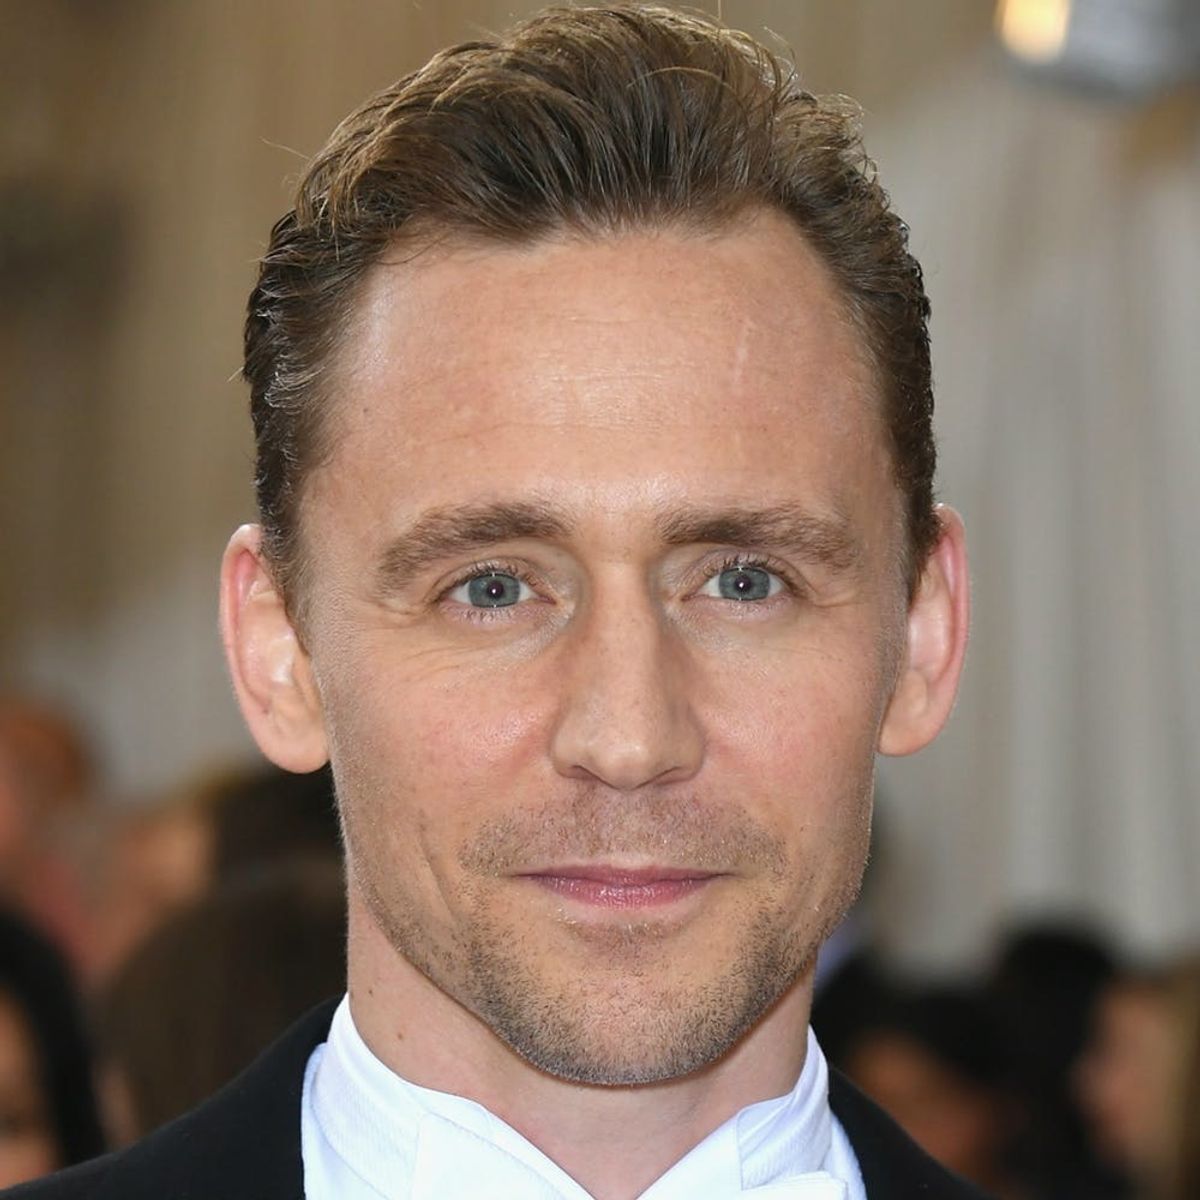 The Internet Just Freaked Out Trying to Decipher This Mysterious Tom Hiddleston Tweet